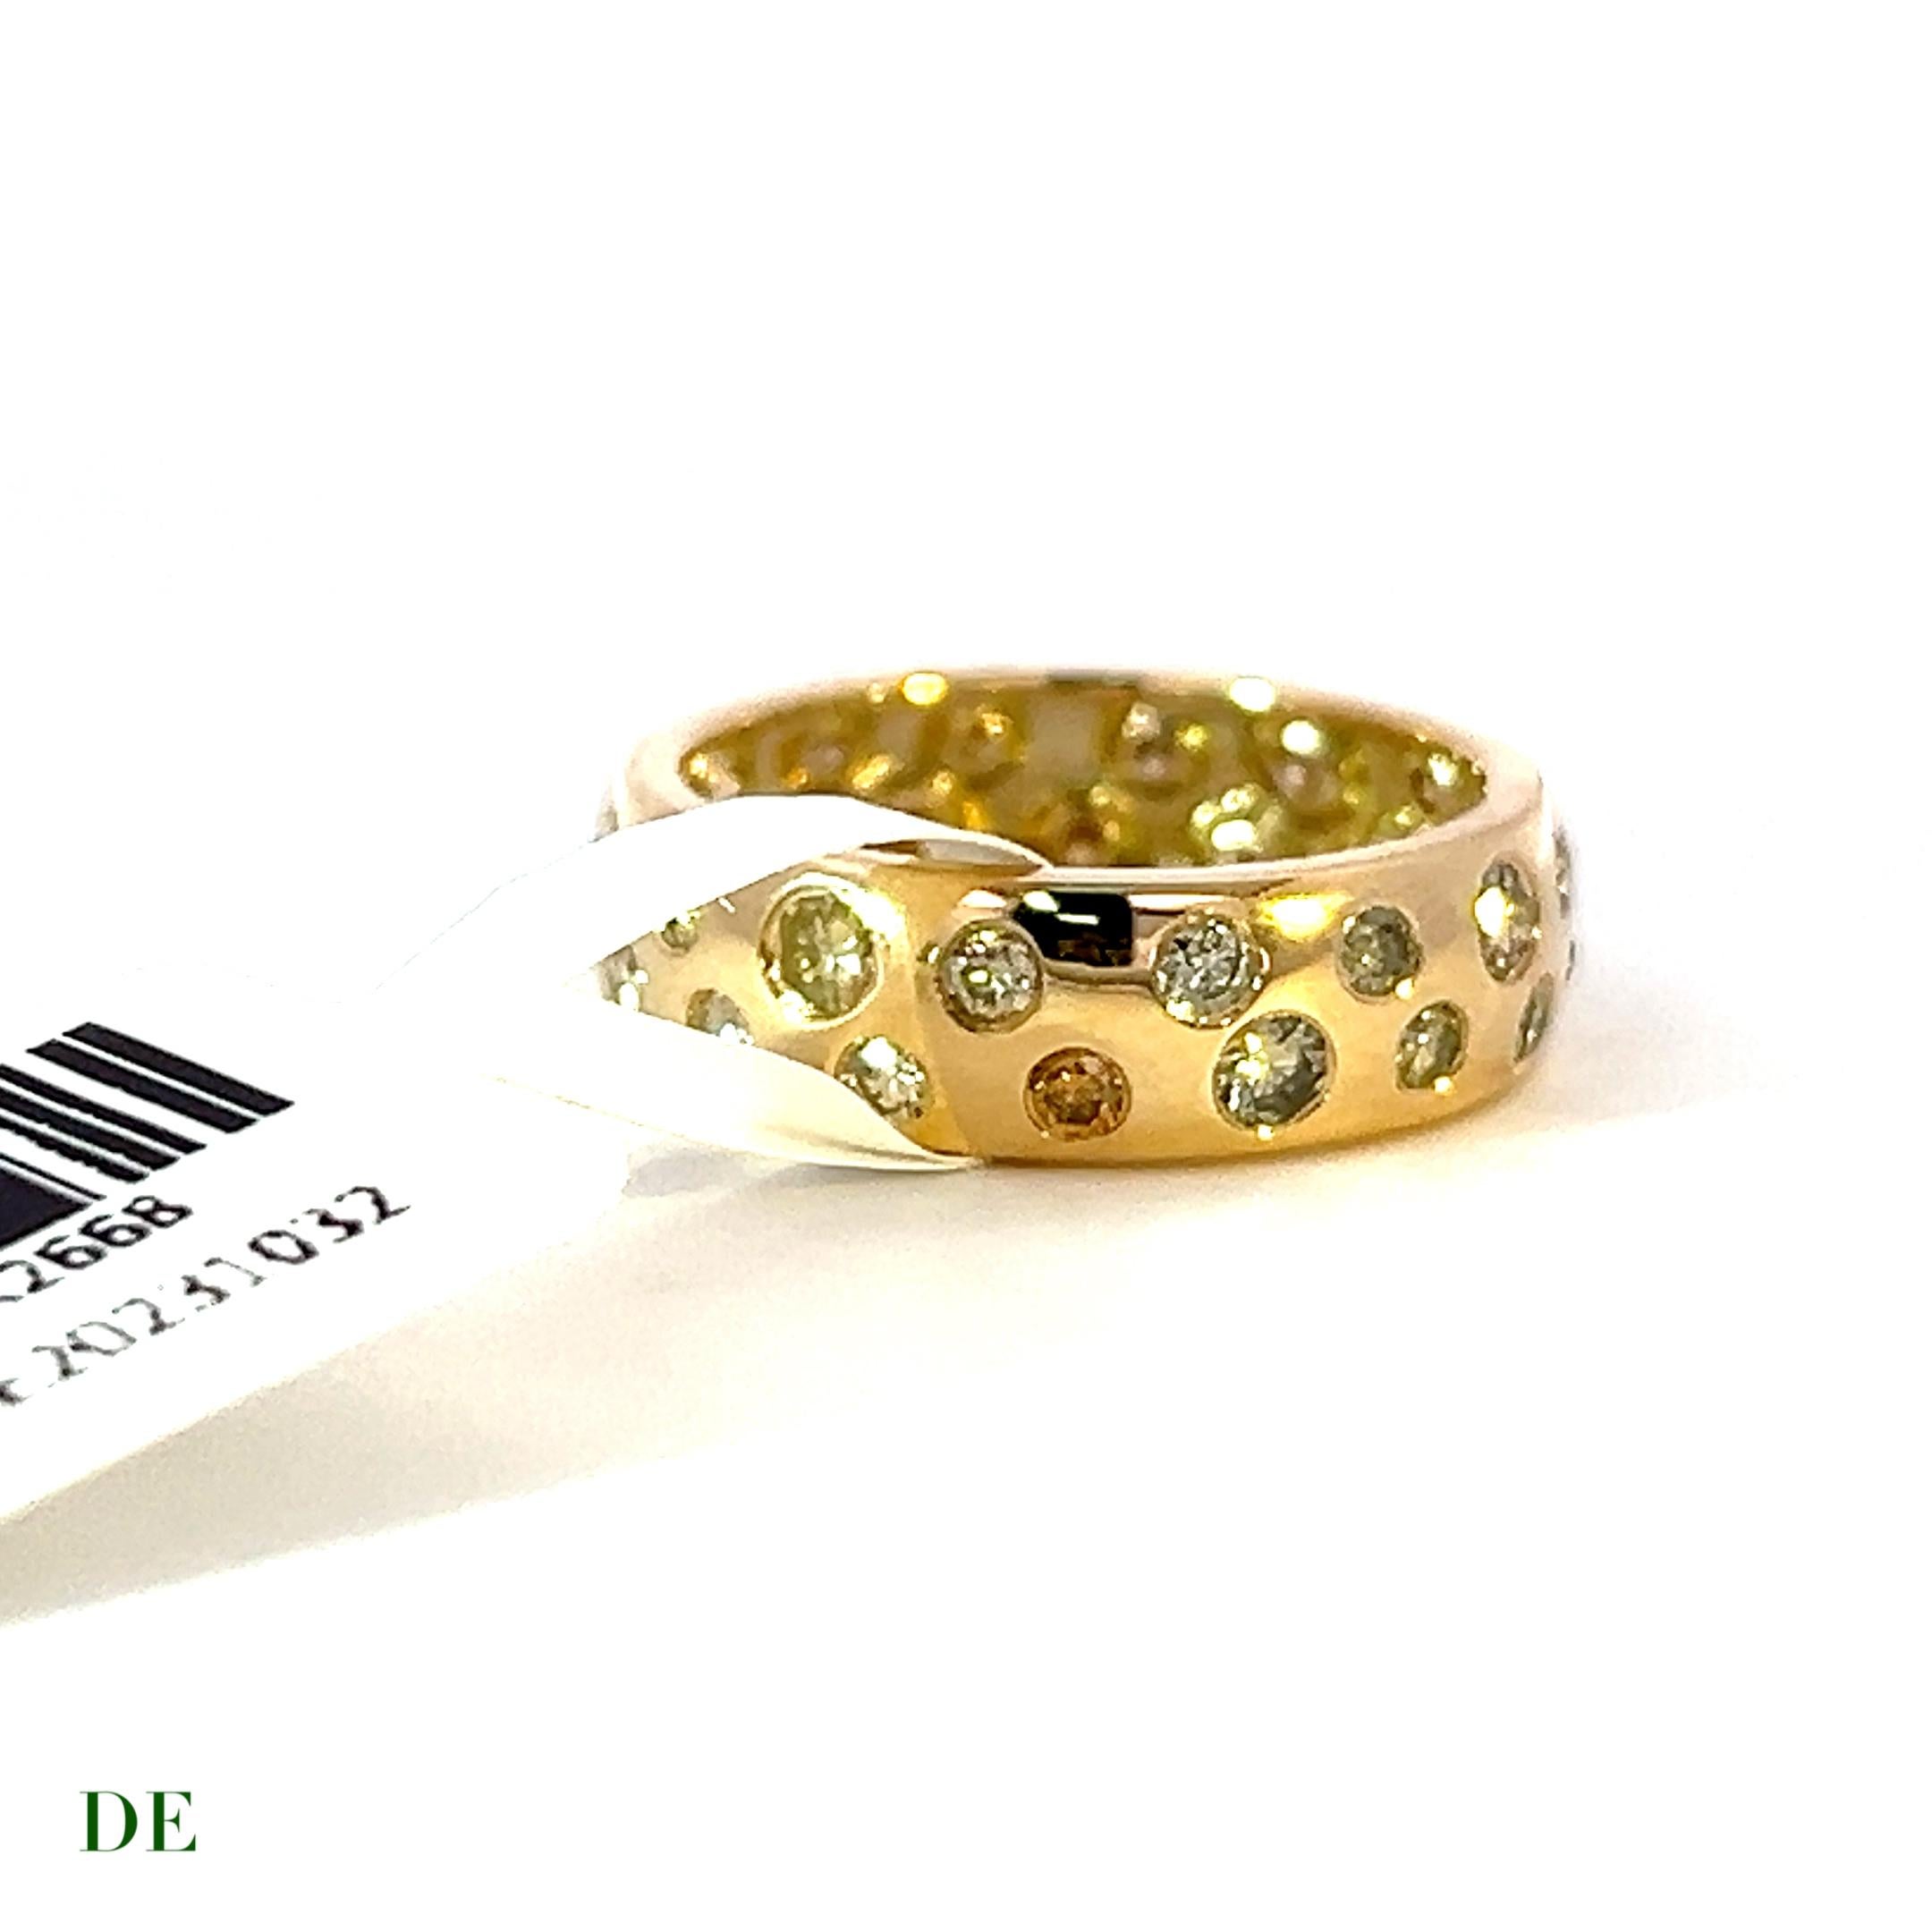 Exclusive 14k Yellow Gold 1.27 Carat Polkadot Fancy Color Diamond Band Ring

Introducing the Exclusive 14k Yellow Gold Polkadot Fancy Color Diamond Band Ring, a truly extraordinary piece that combines luxury and individuality. This captivating ring